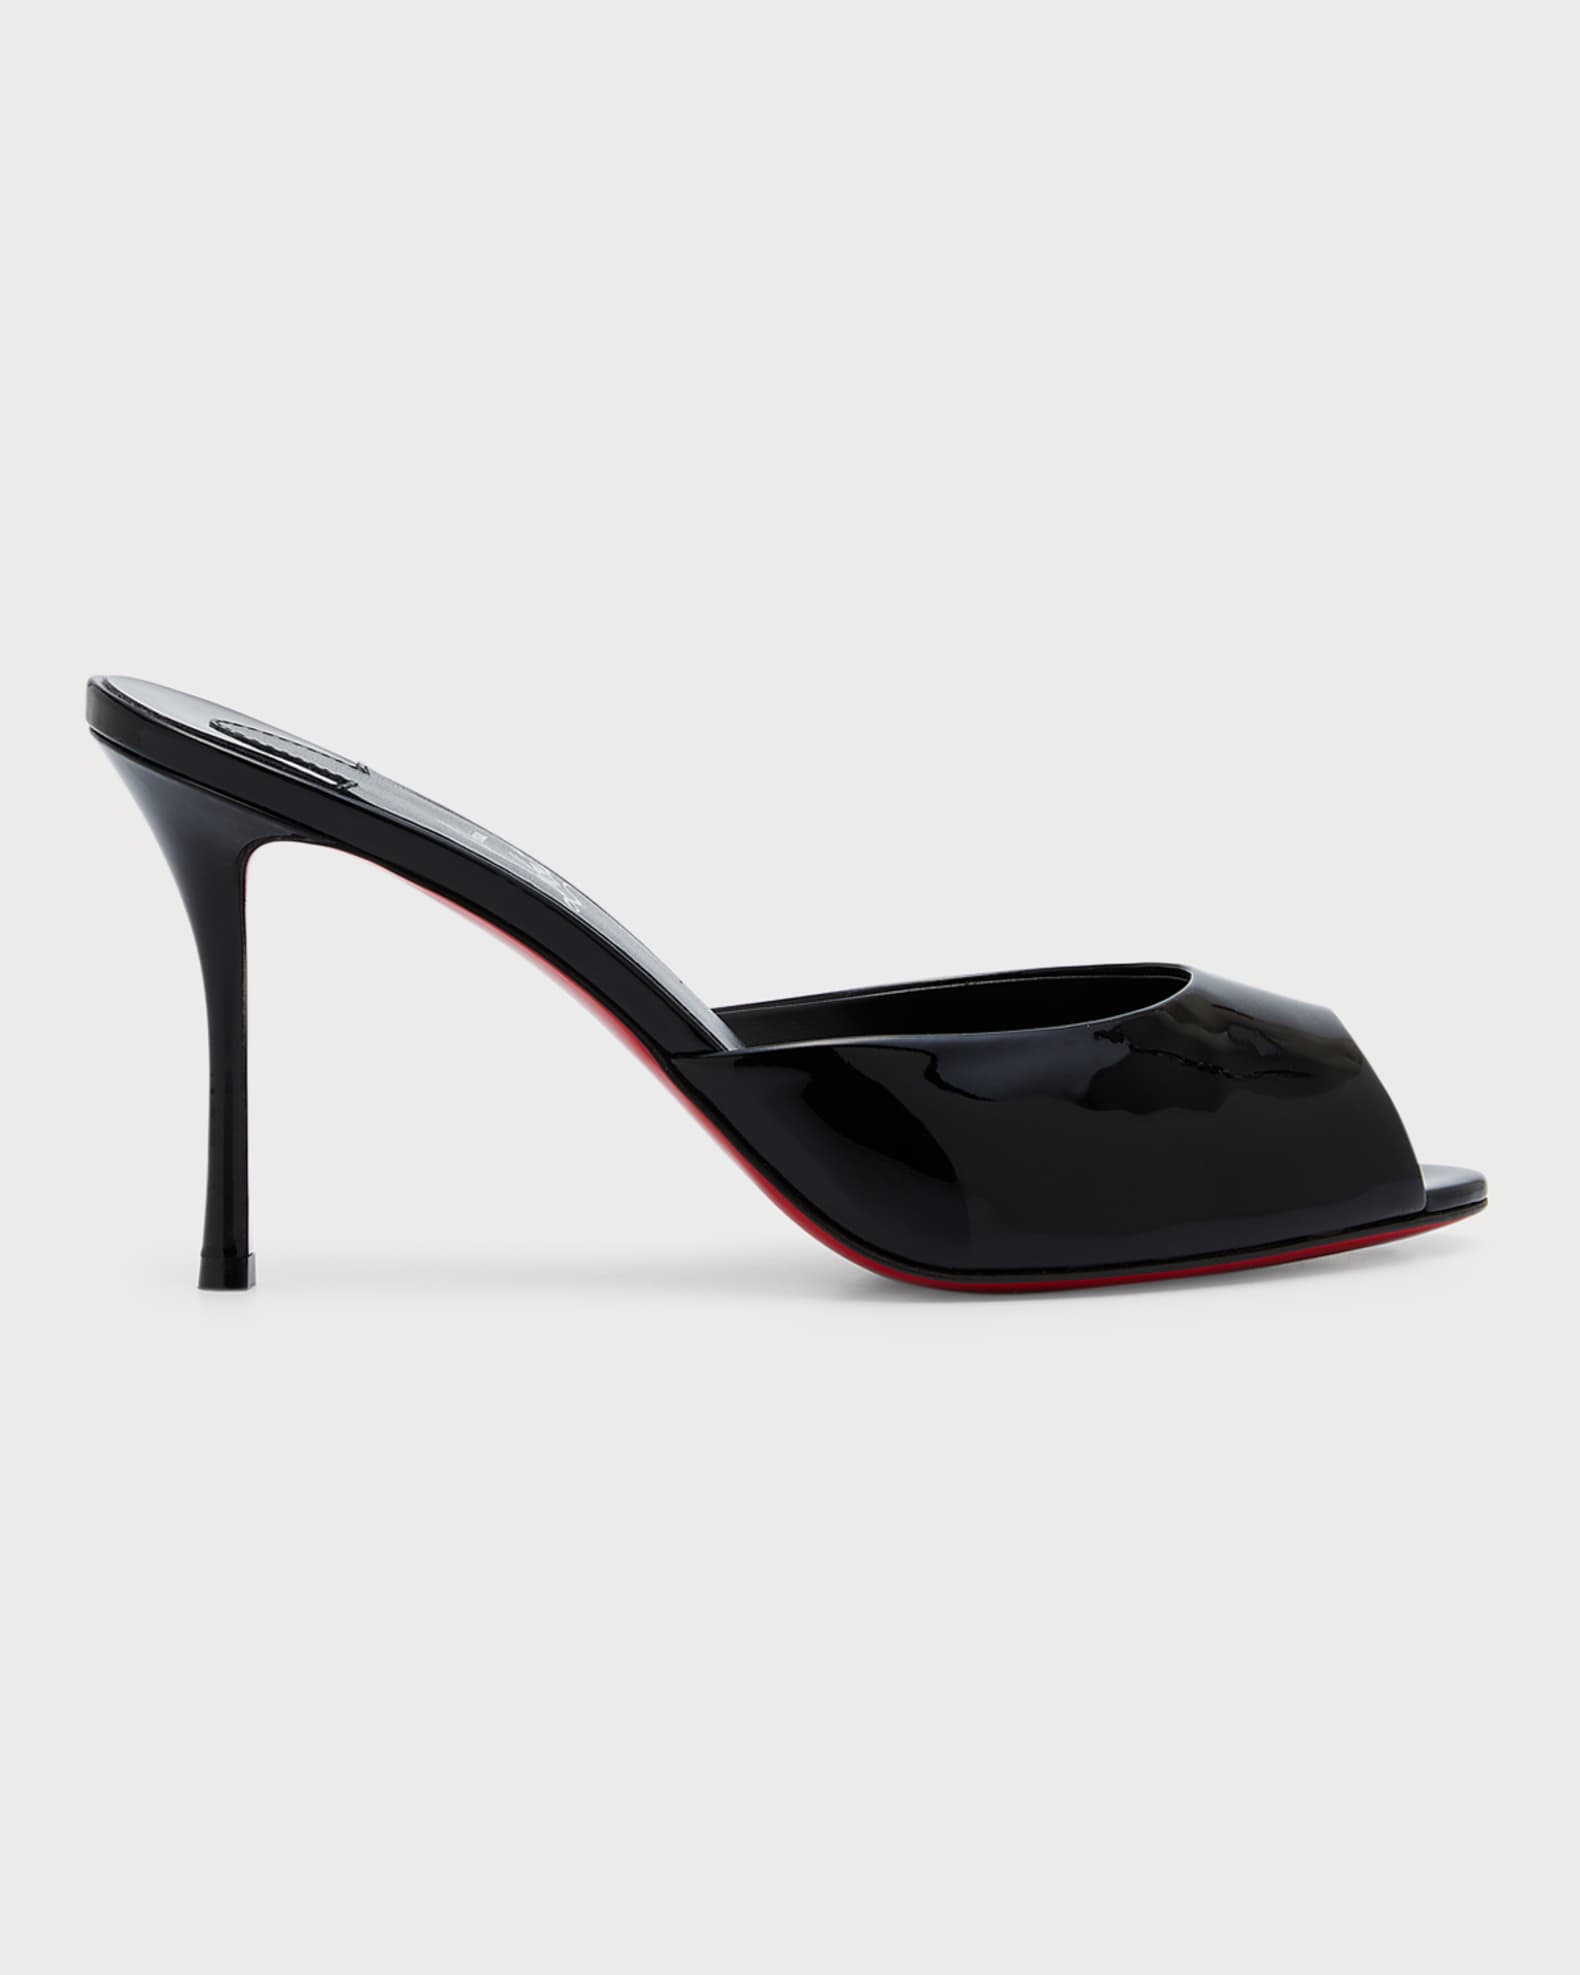 Christian Louboutin Me Dolly Patent Red Sole Sandals | Neiman Marcus